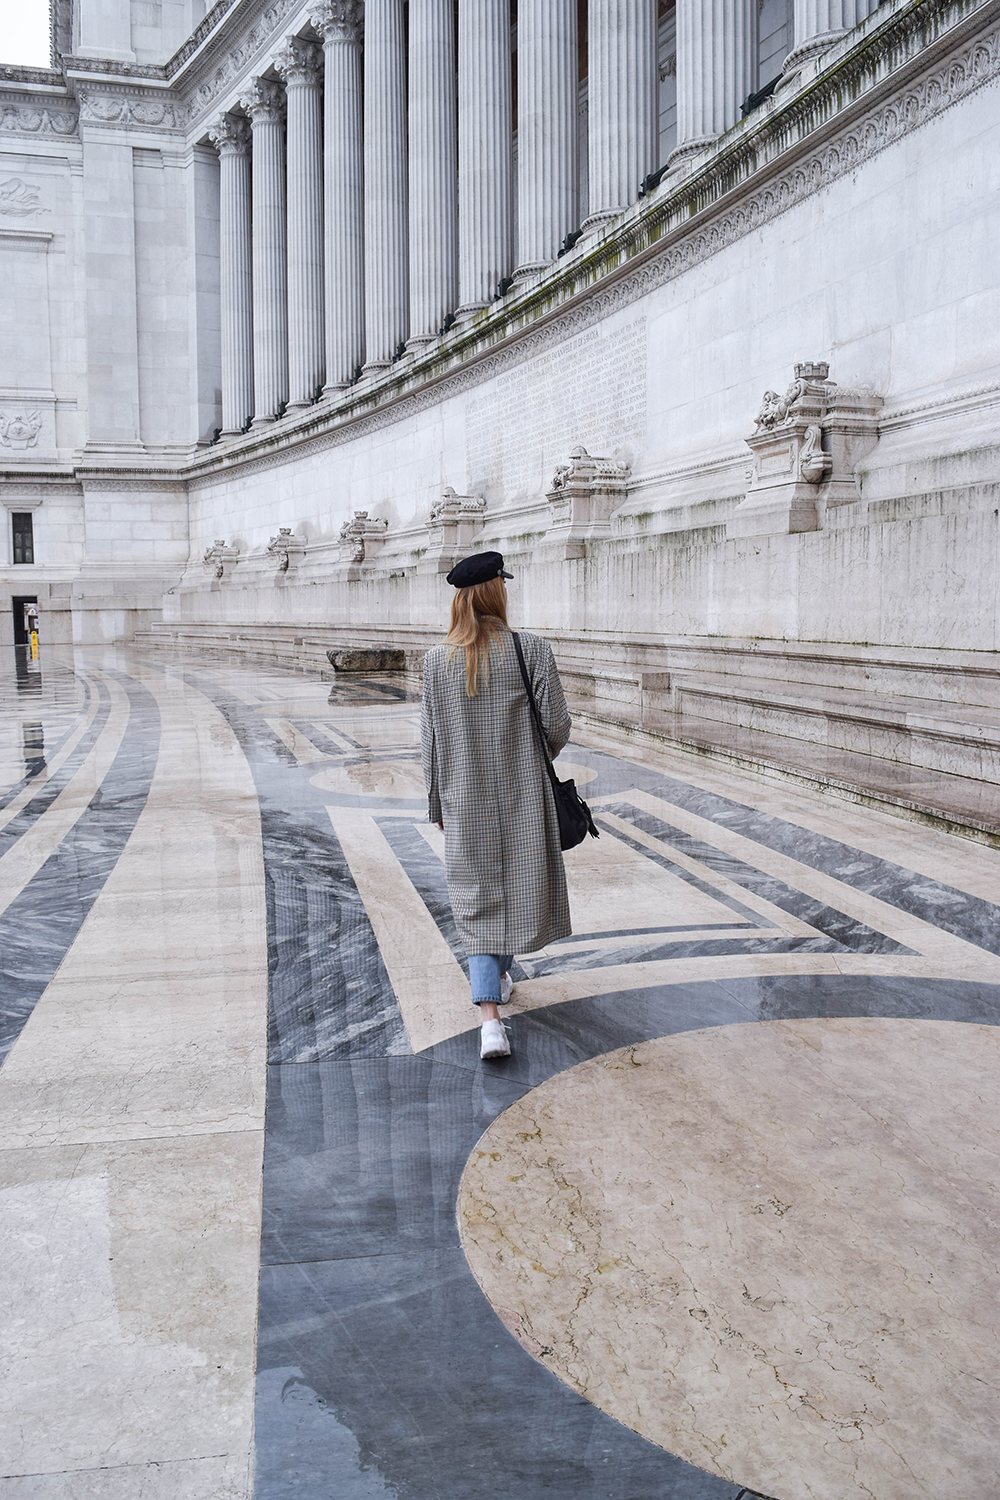 Girl with H&M checked coat in Vittorio Emanuele monument in Rome